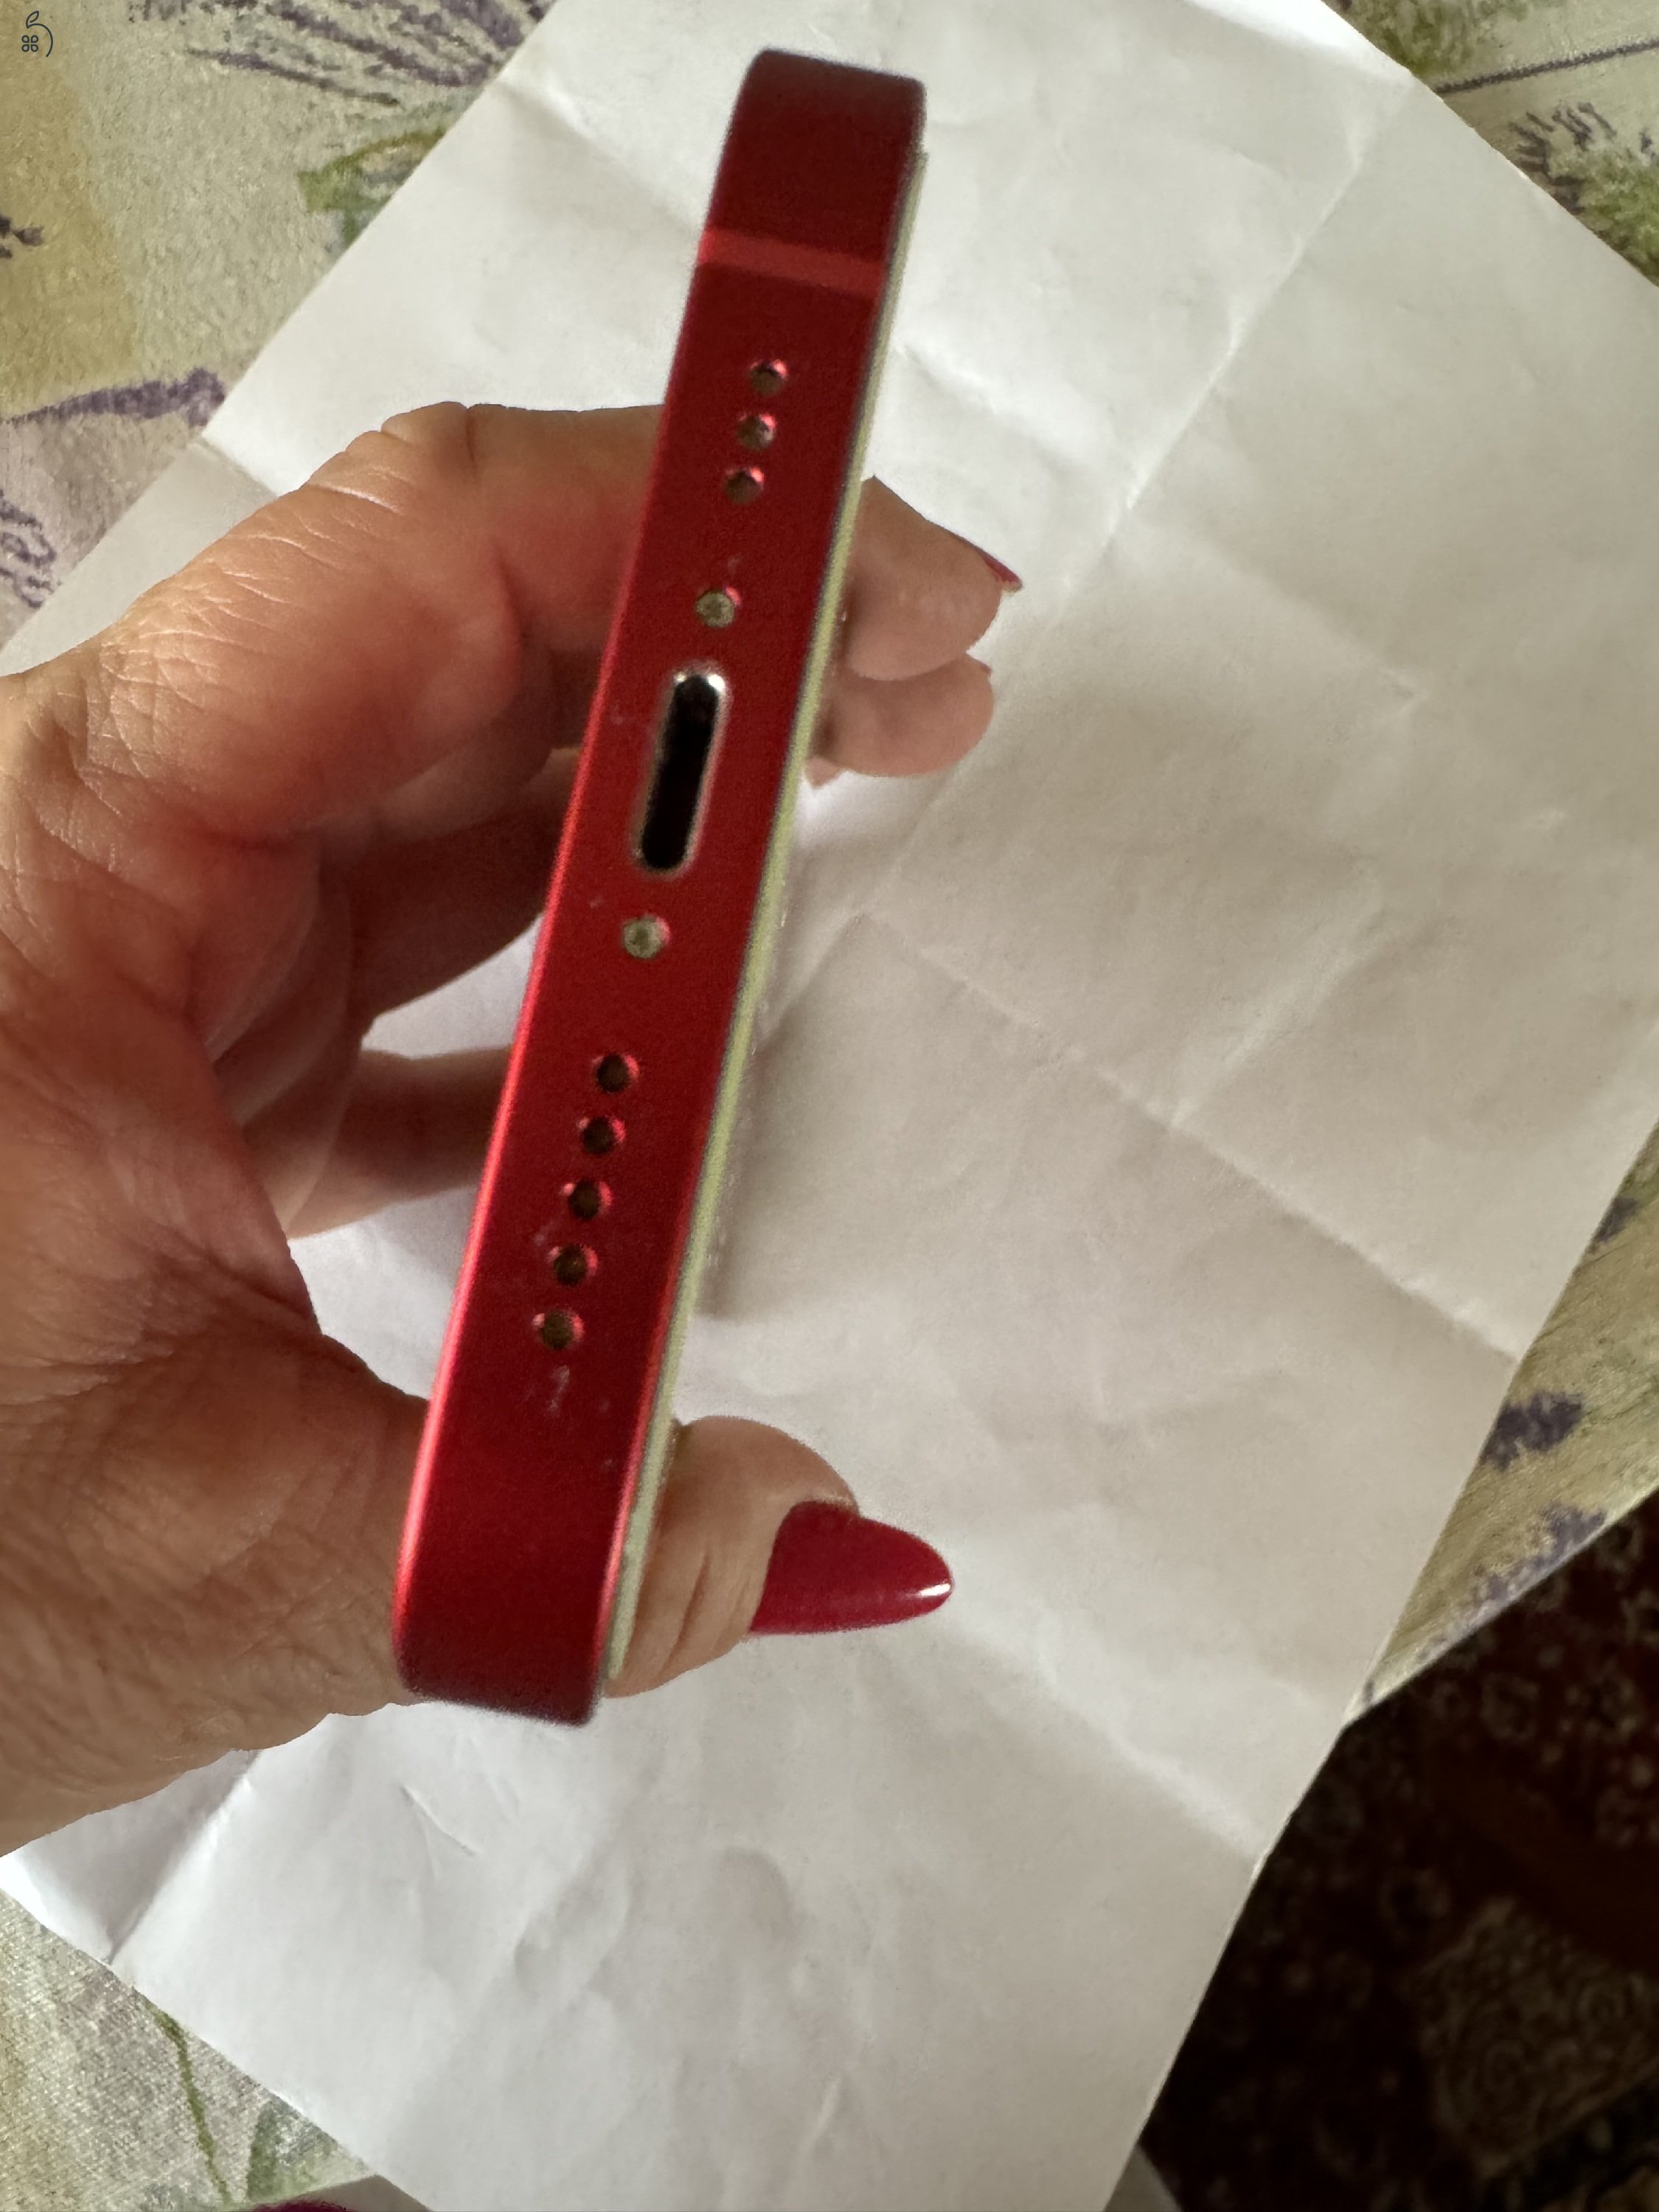 IPhone 13  Red 128GB